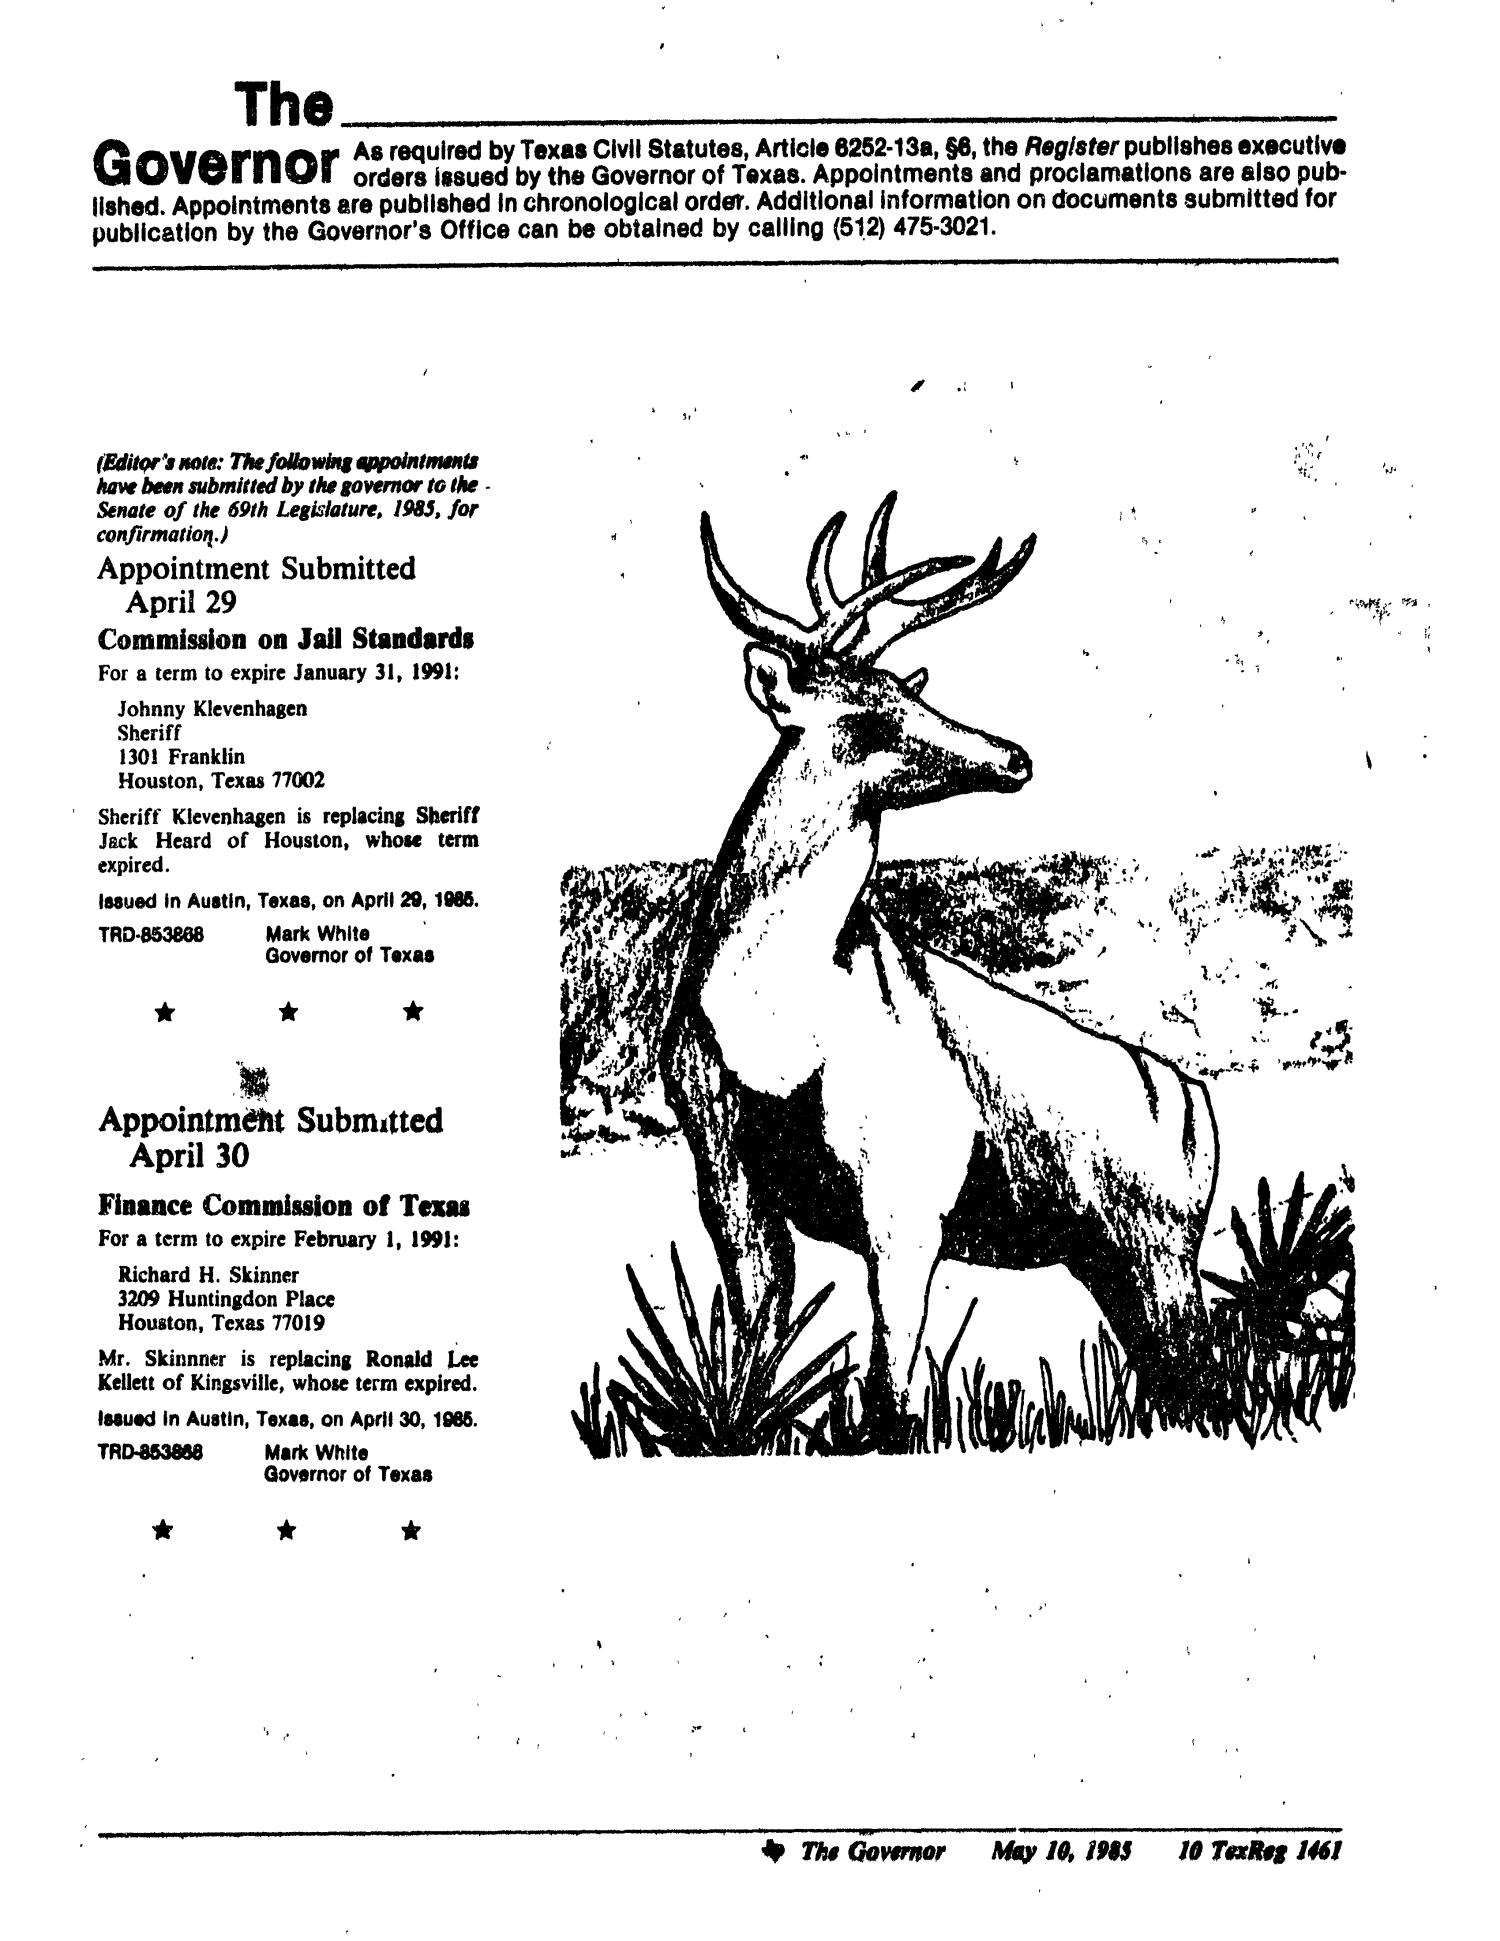 Texas Register, Volume 10, Number 36, Pages 1459-1518, May 10, 1985
                                                
                                                    1461
                                                